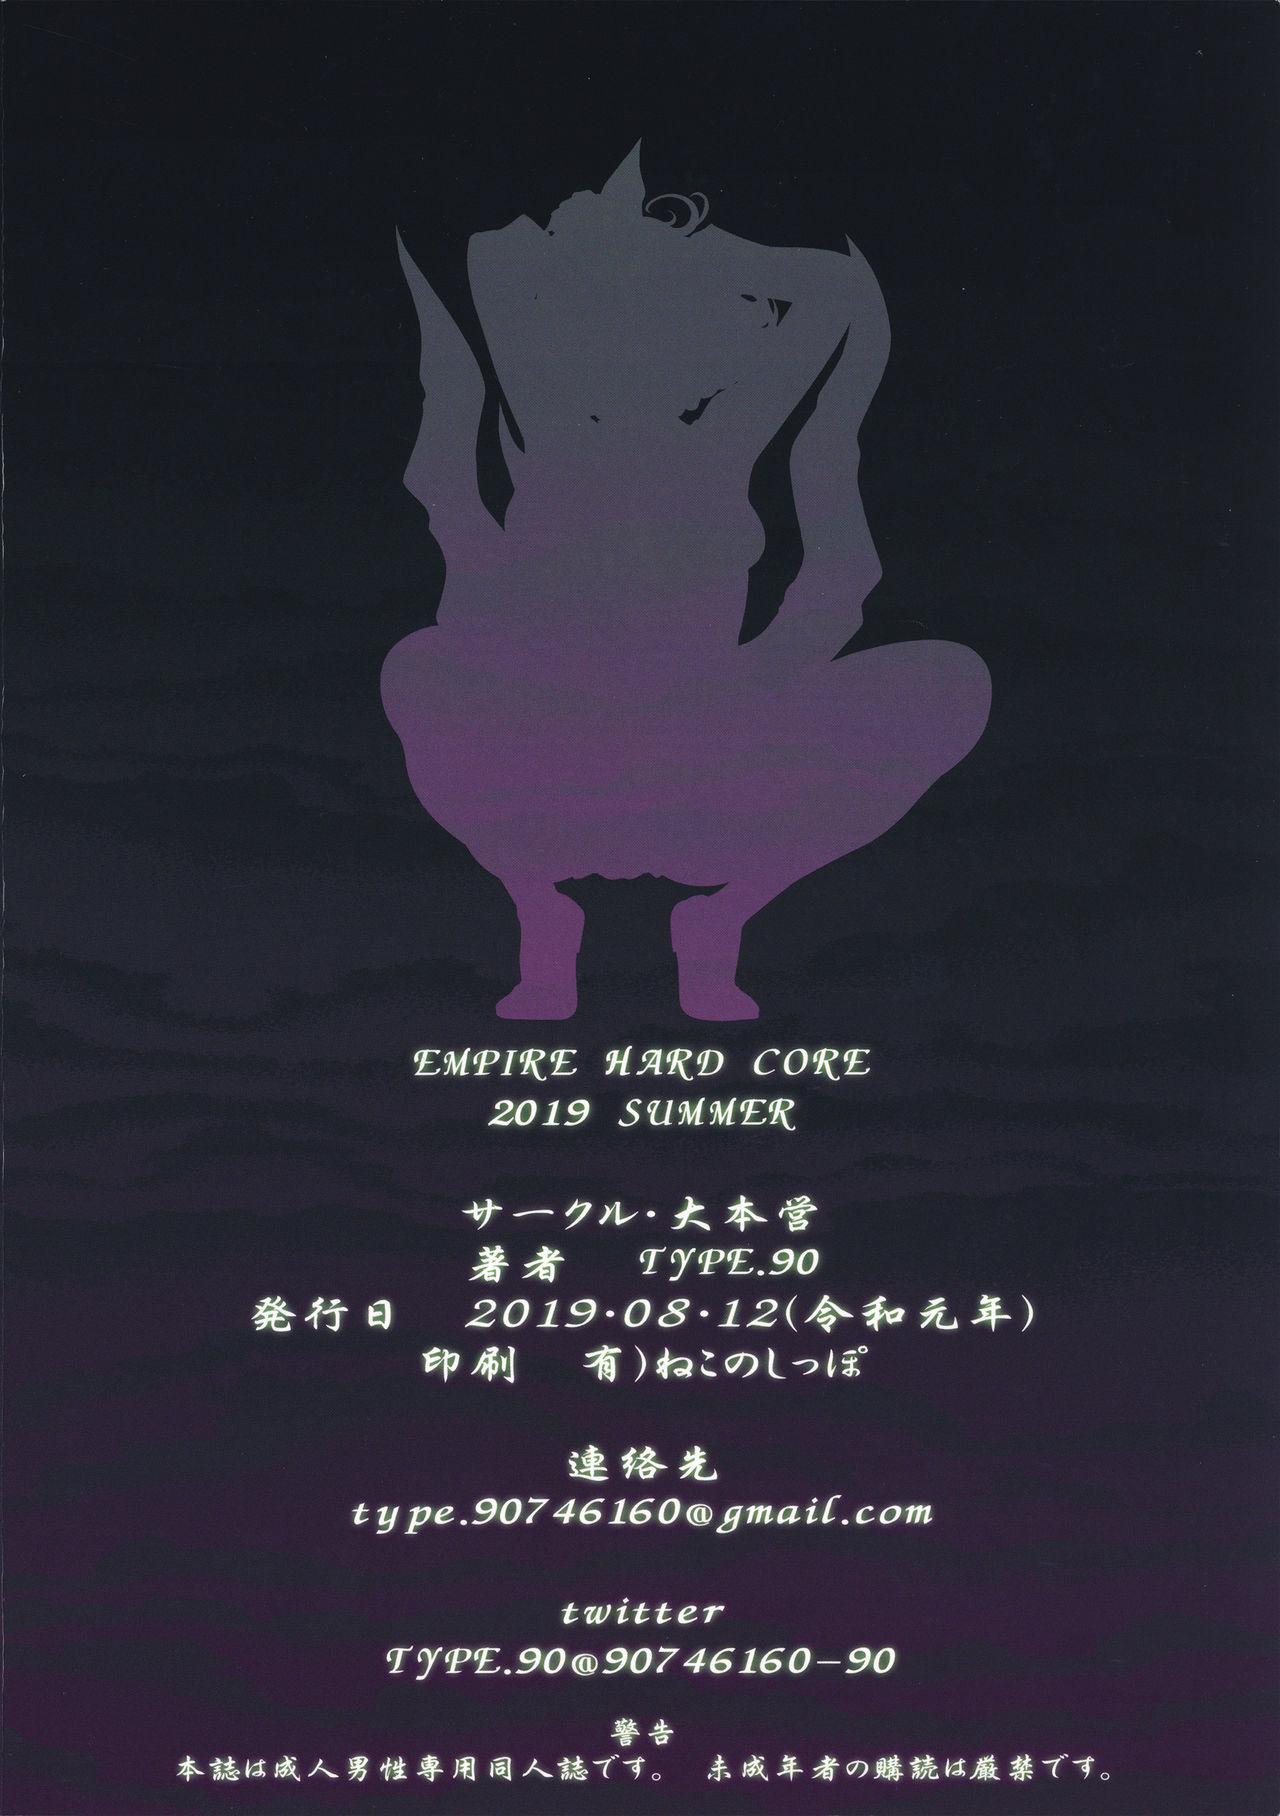 Spit EMPIRE HARD CORE 2019 SUMMER - One punch man Celebrity Nudes - Page 26